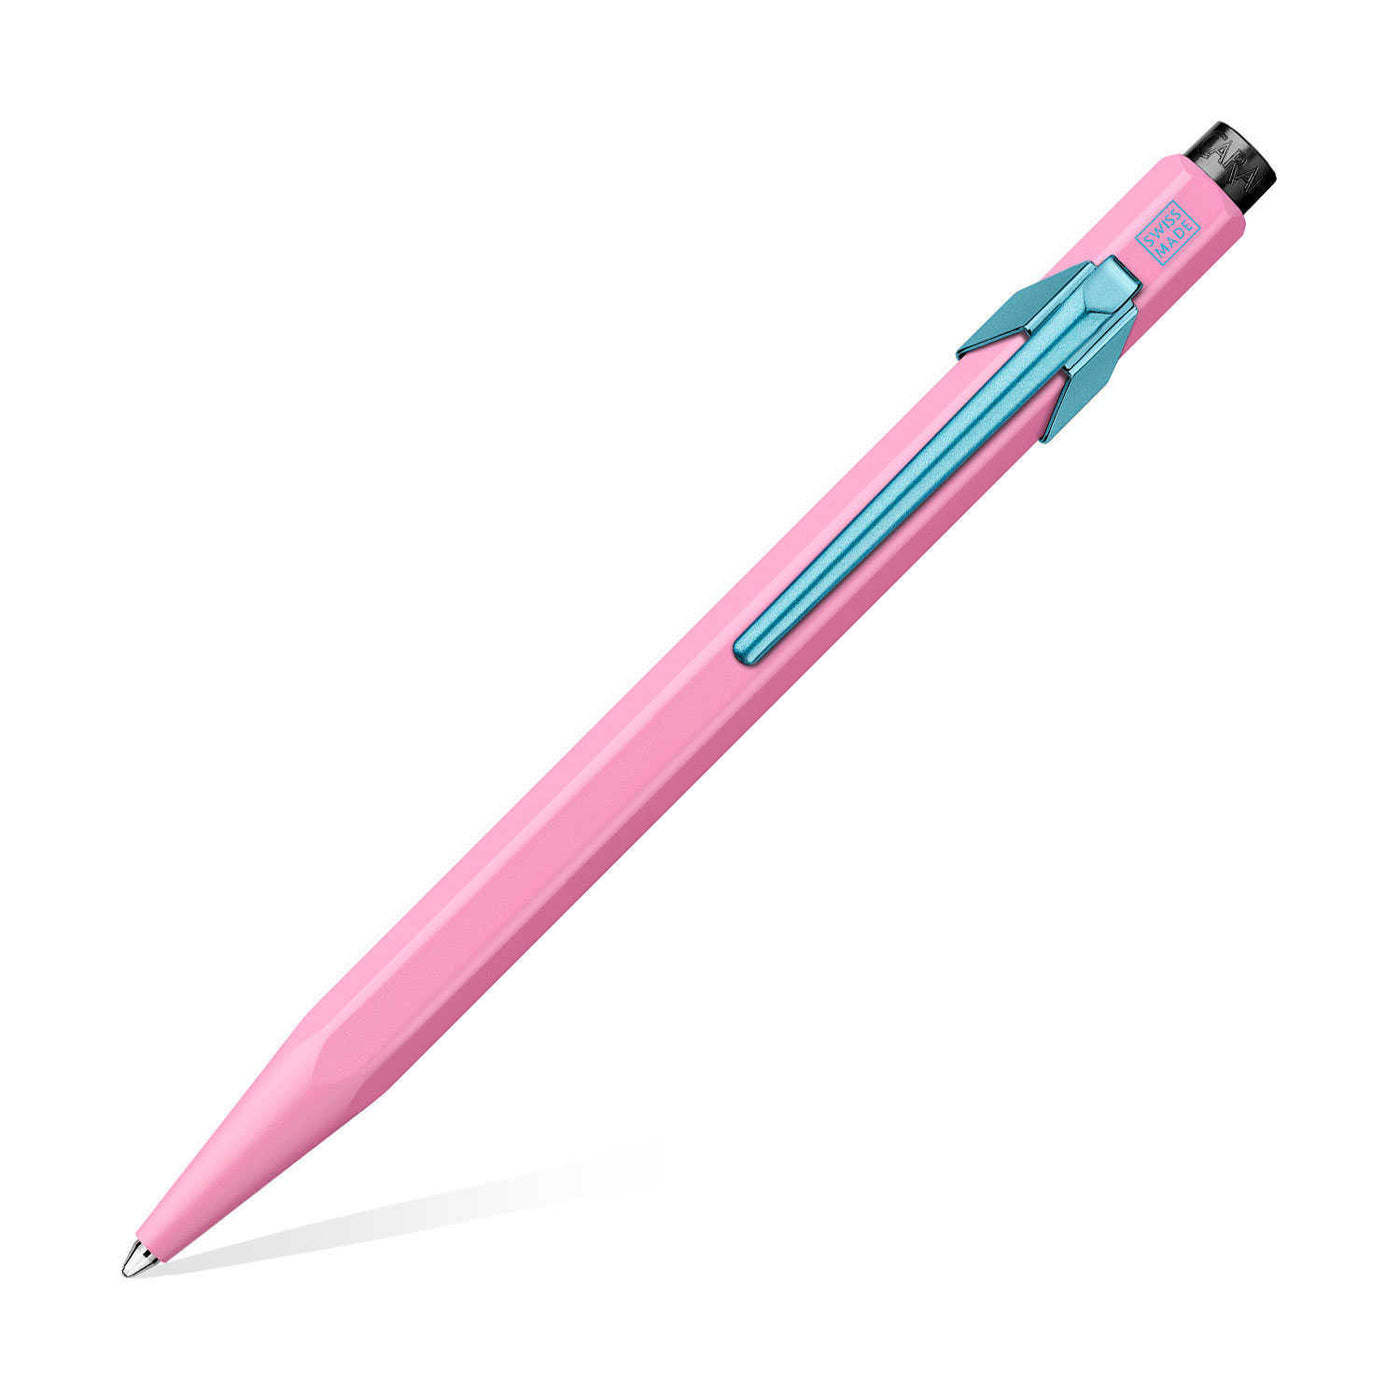 Caran d'Ache 849 Claim Your Style Ball Pen - Hibiscus Pink (Limited Edition) 1